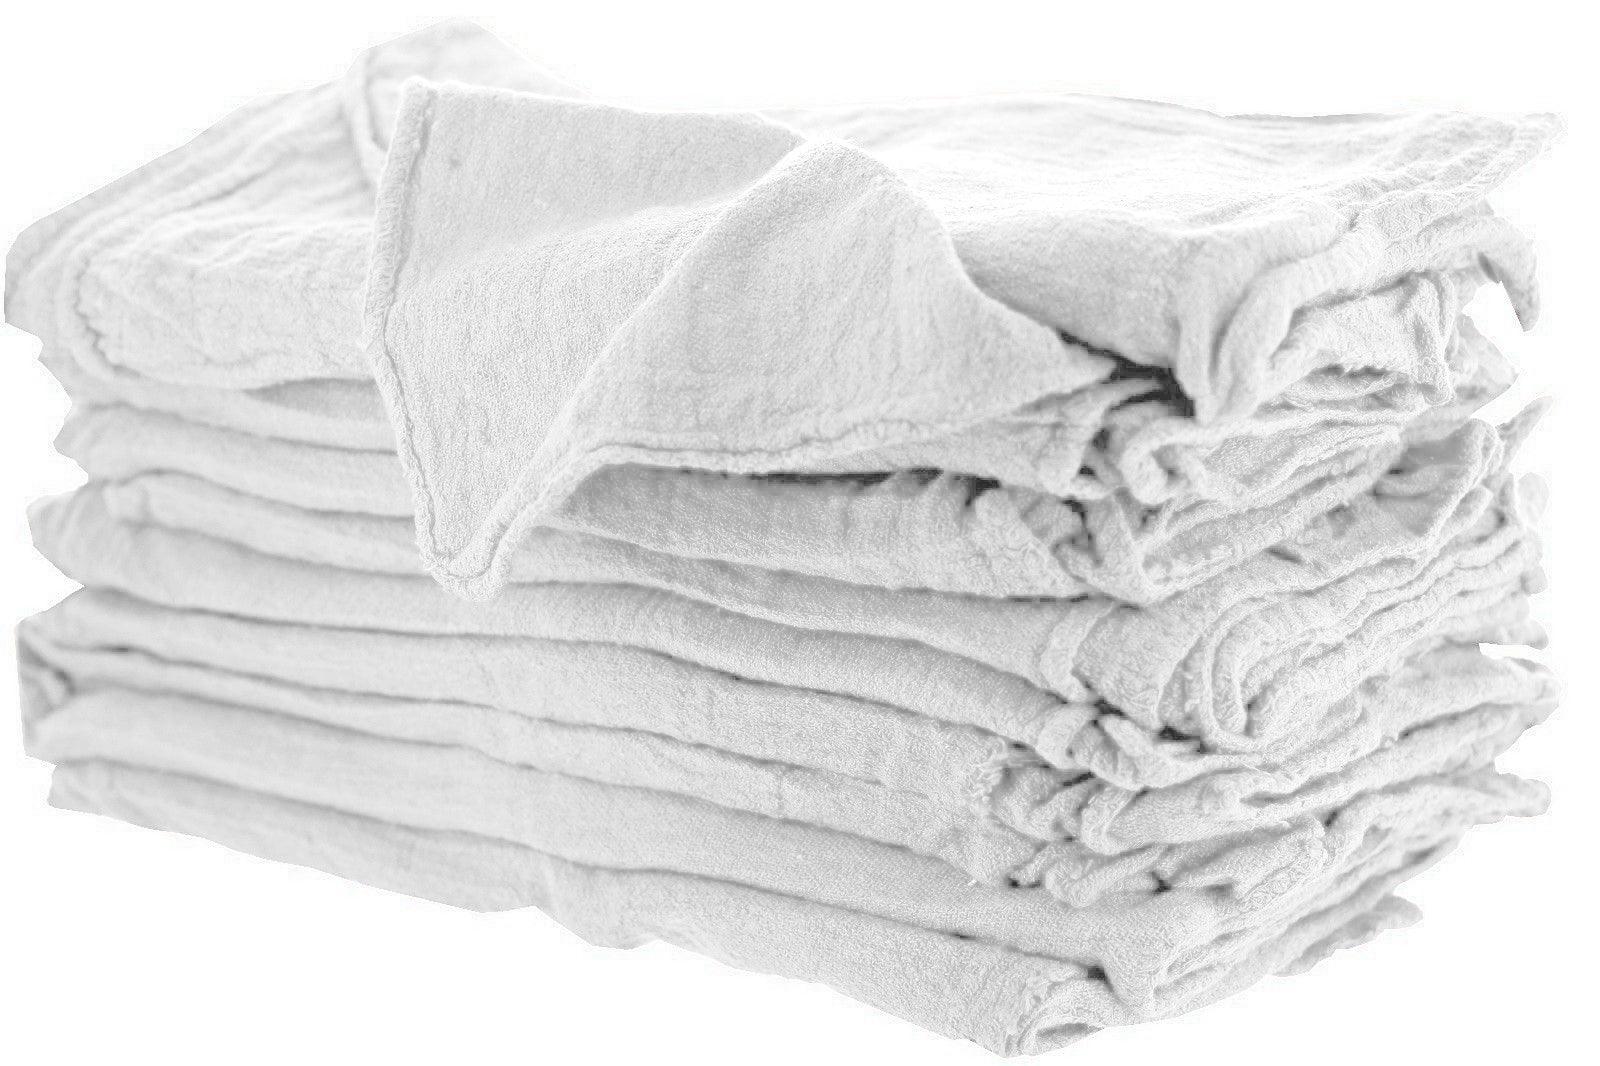 Cotton Homes 1000Pc Shop Towels Rags Bulk– 12 x12 Inch- Regenerated Cotton  Multipurpose Cleaning towels, Industrial Wiping Cloth, Paint Cloth, Bar  Towels- Prewashed and Reusable. (Blue, 1000). 